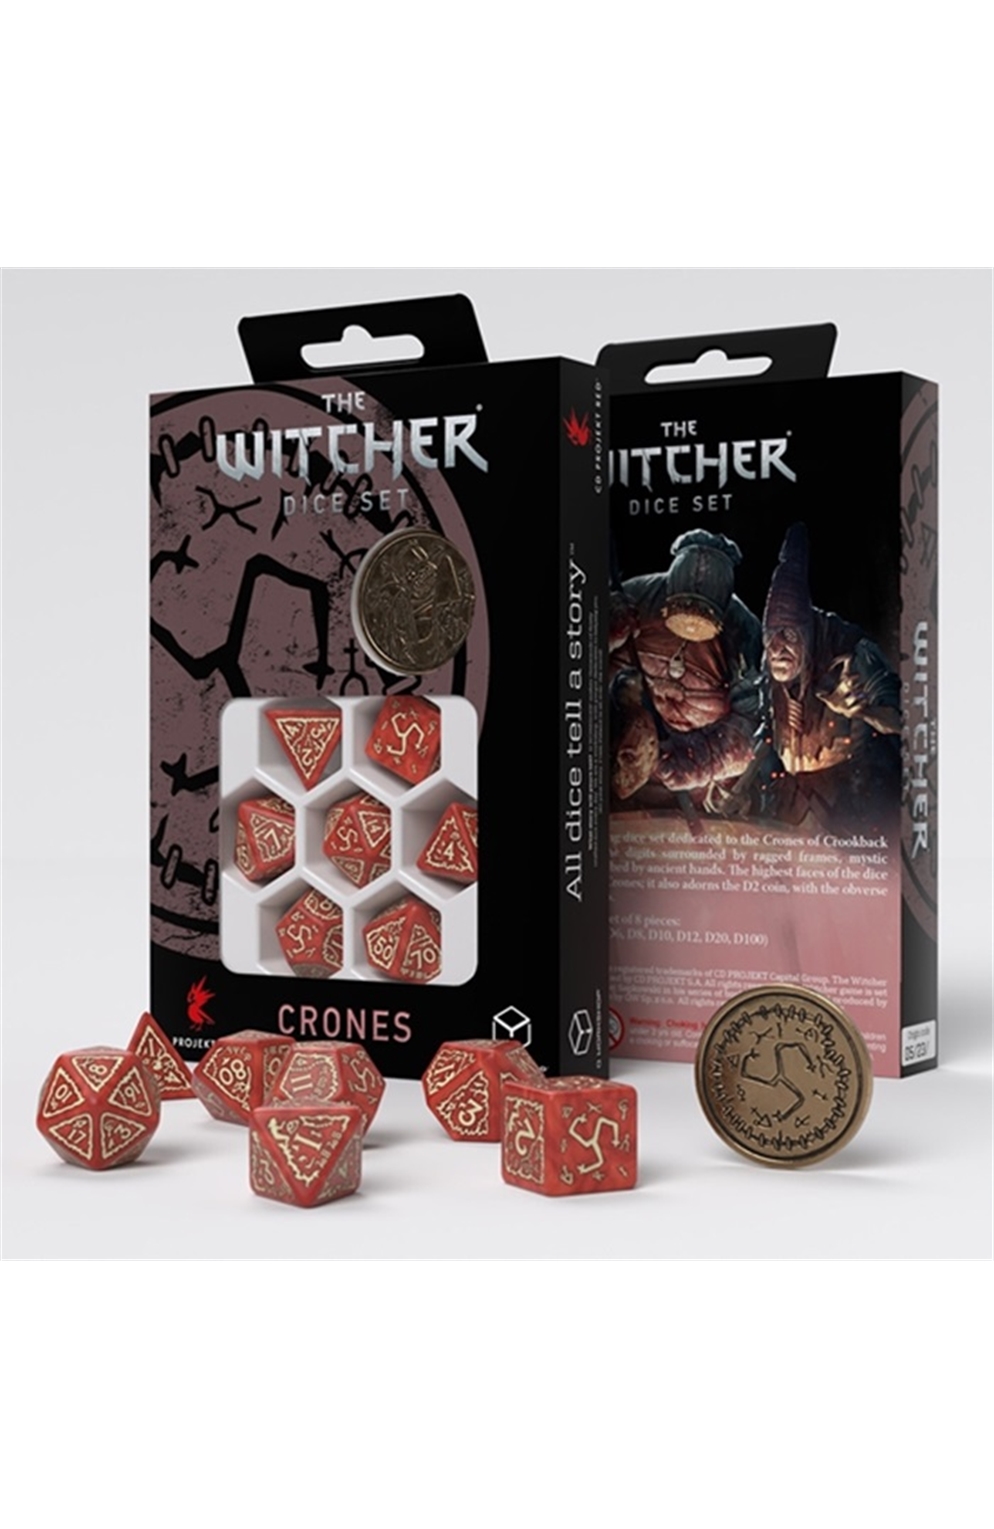 The Witcher 7 Dice Set: Crones: Brewess